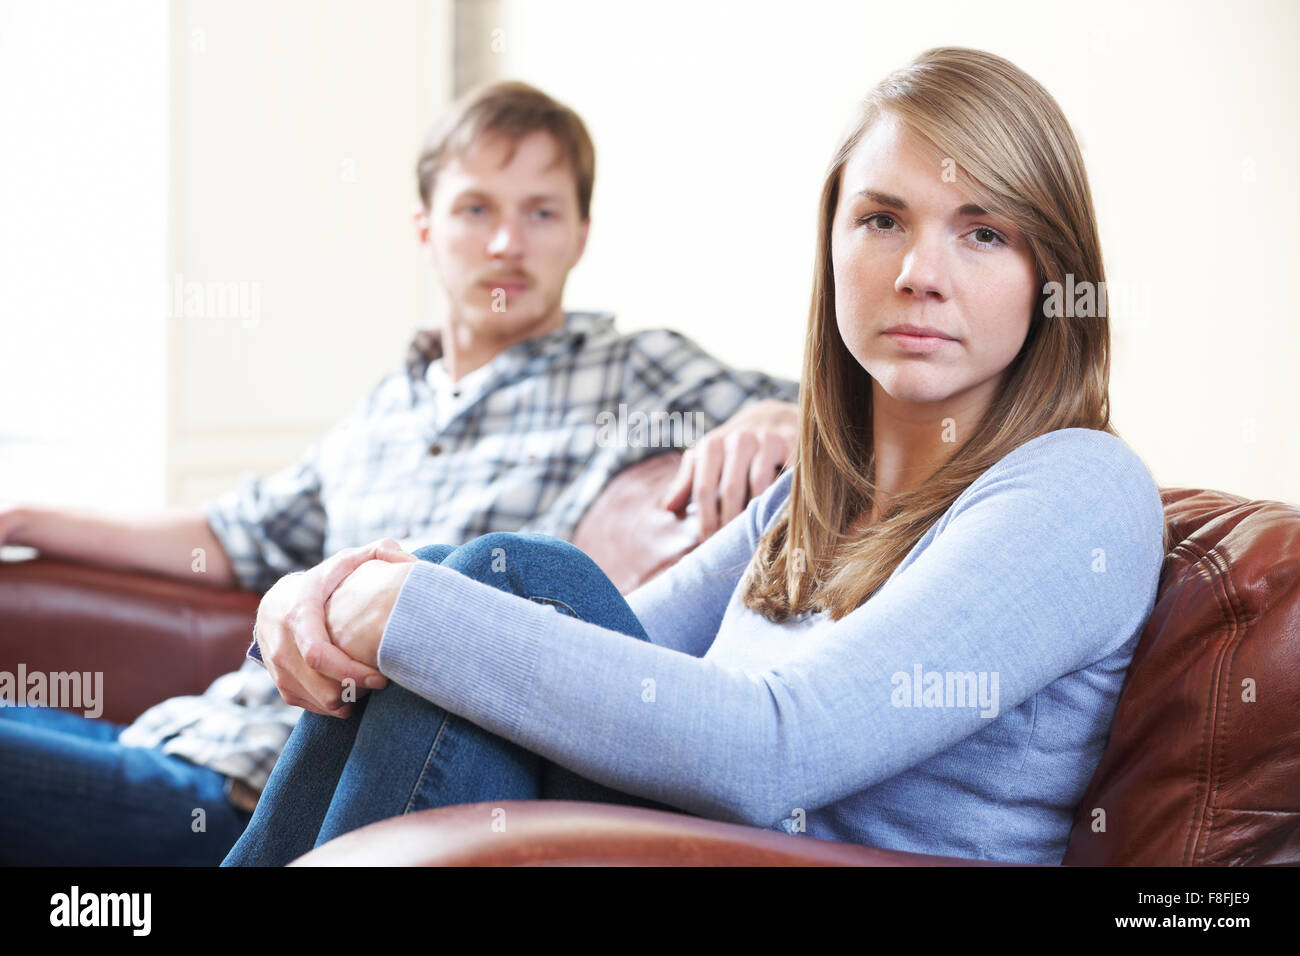 Couple With Relationship Difficulties At Home Stock Photo